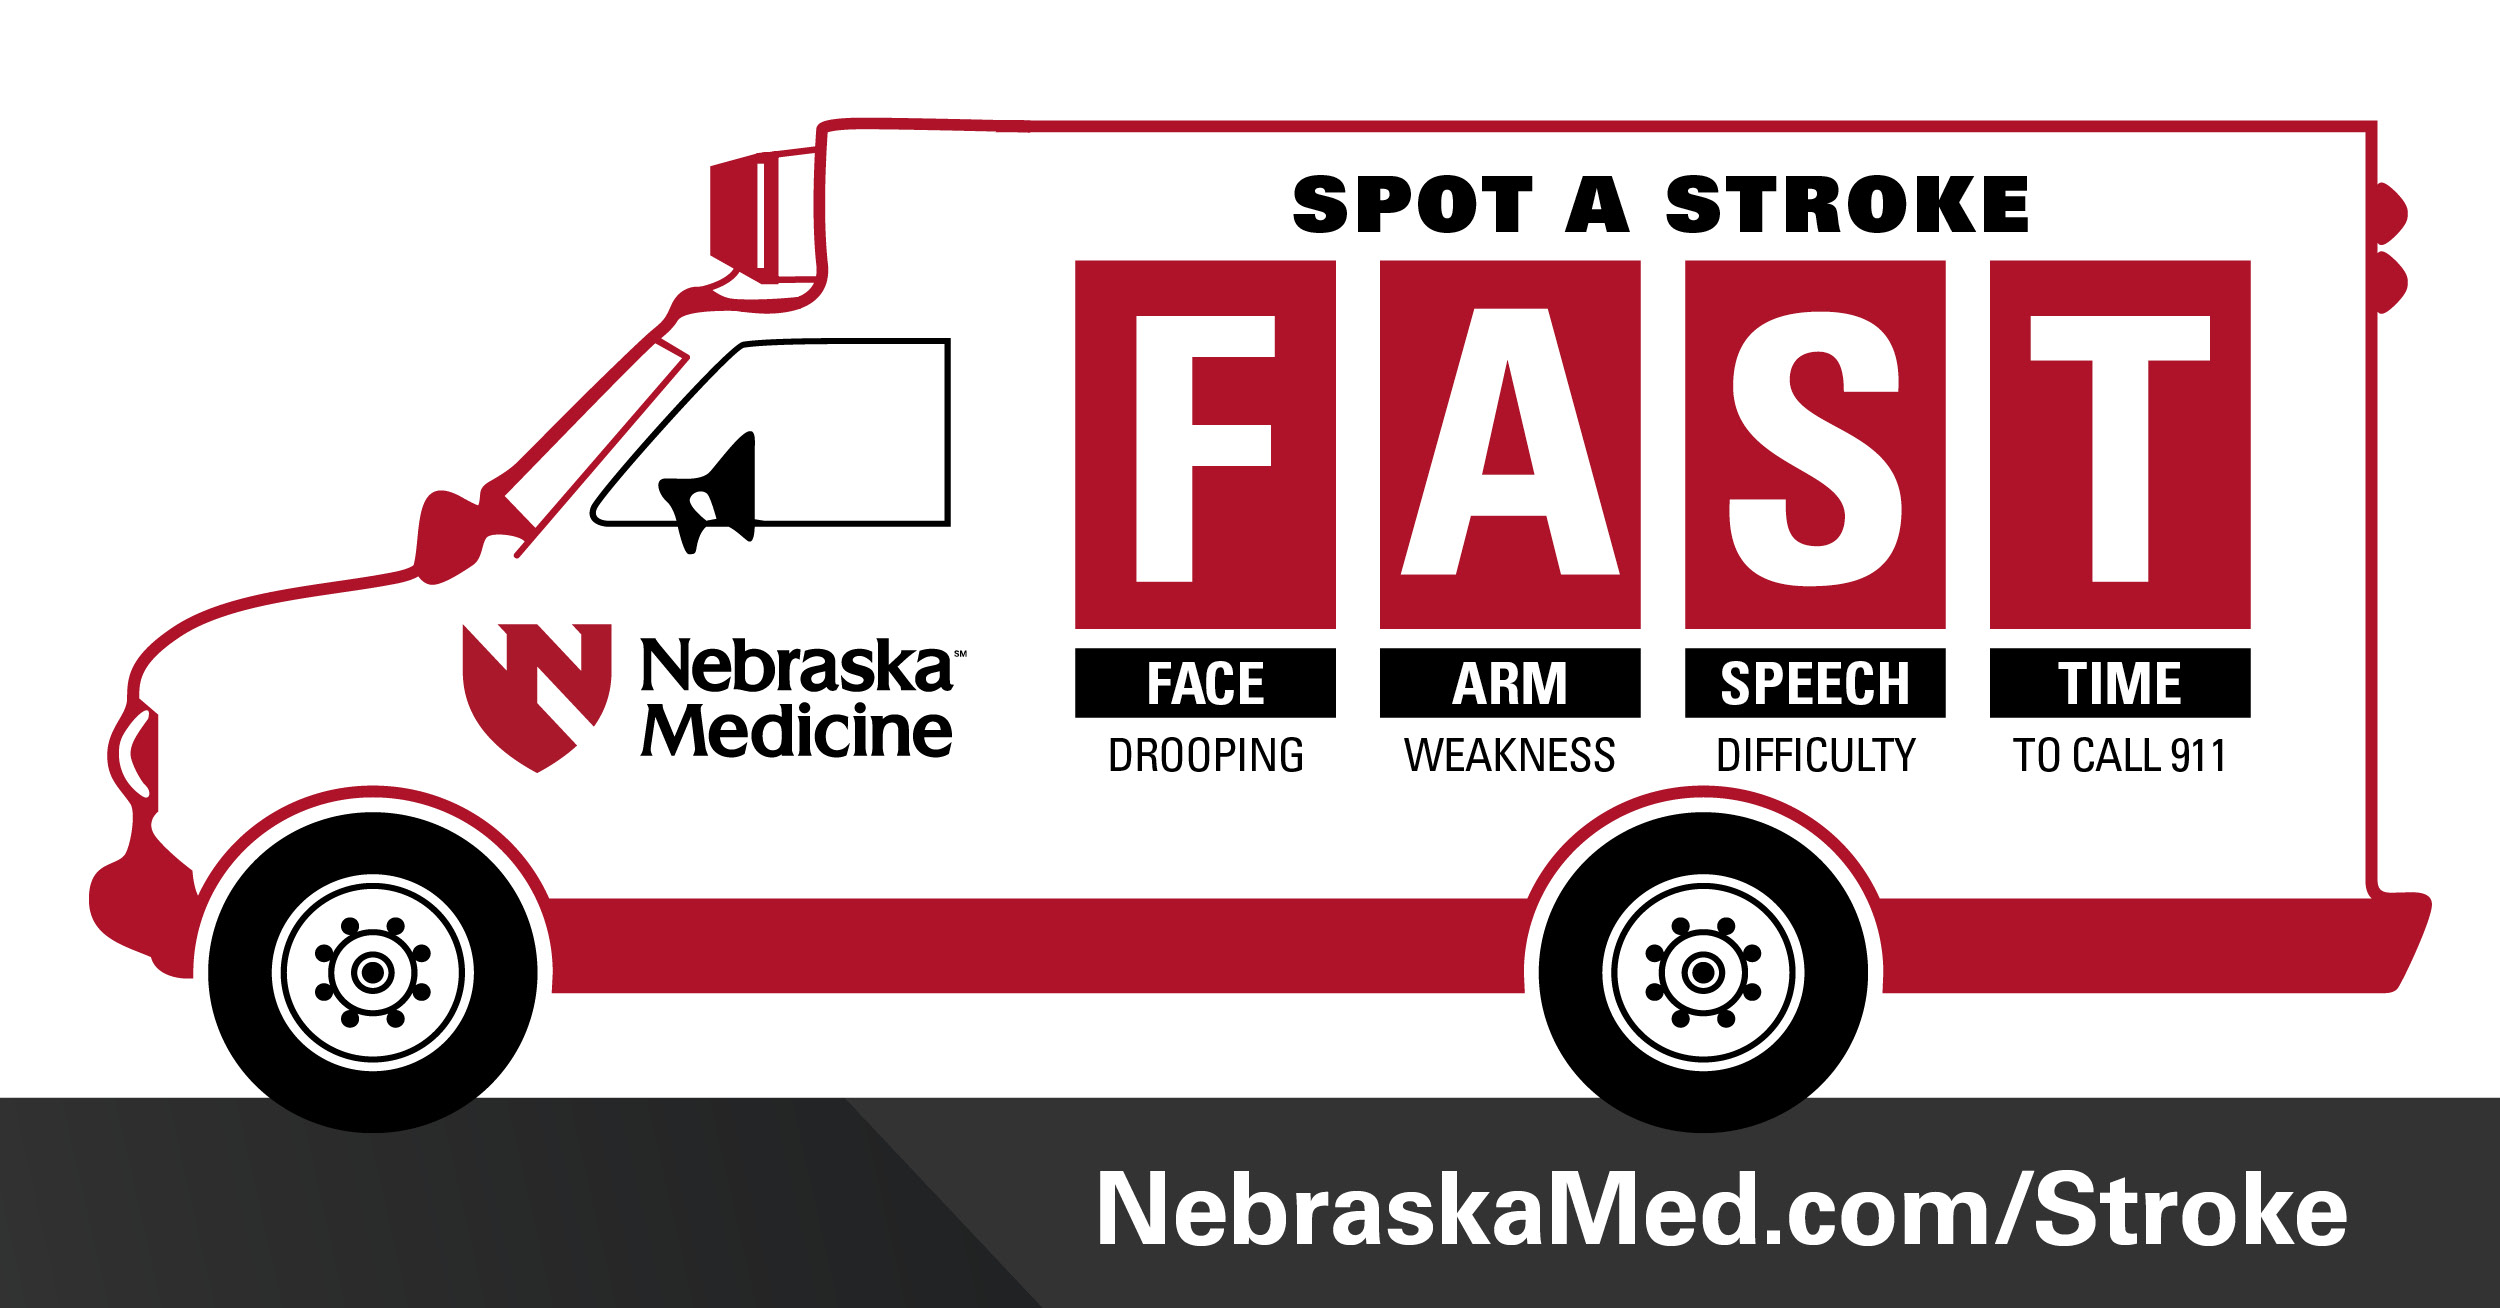 Infographic: Spot A Stroke: F.A.S.T. FACE: drooping ARM: Weakness SPEECH: Difficulty TIME: to call 911 | NebraskaMed.com/Stroke